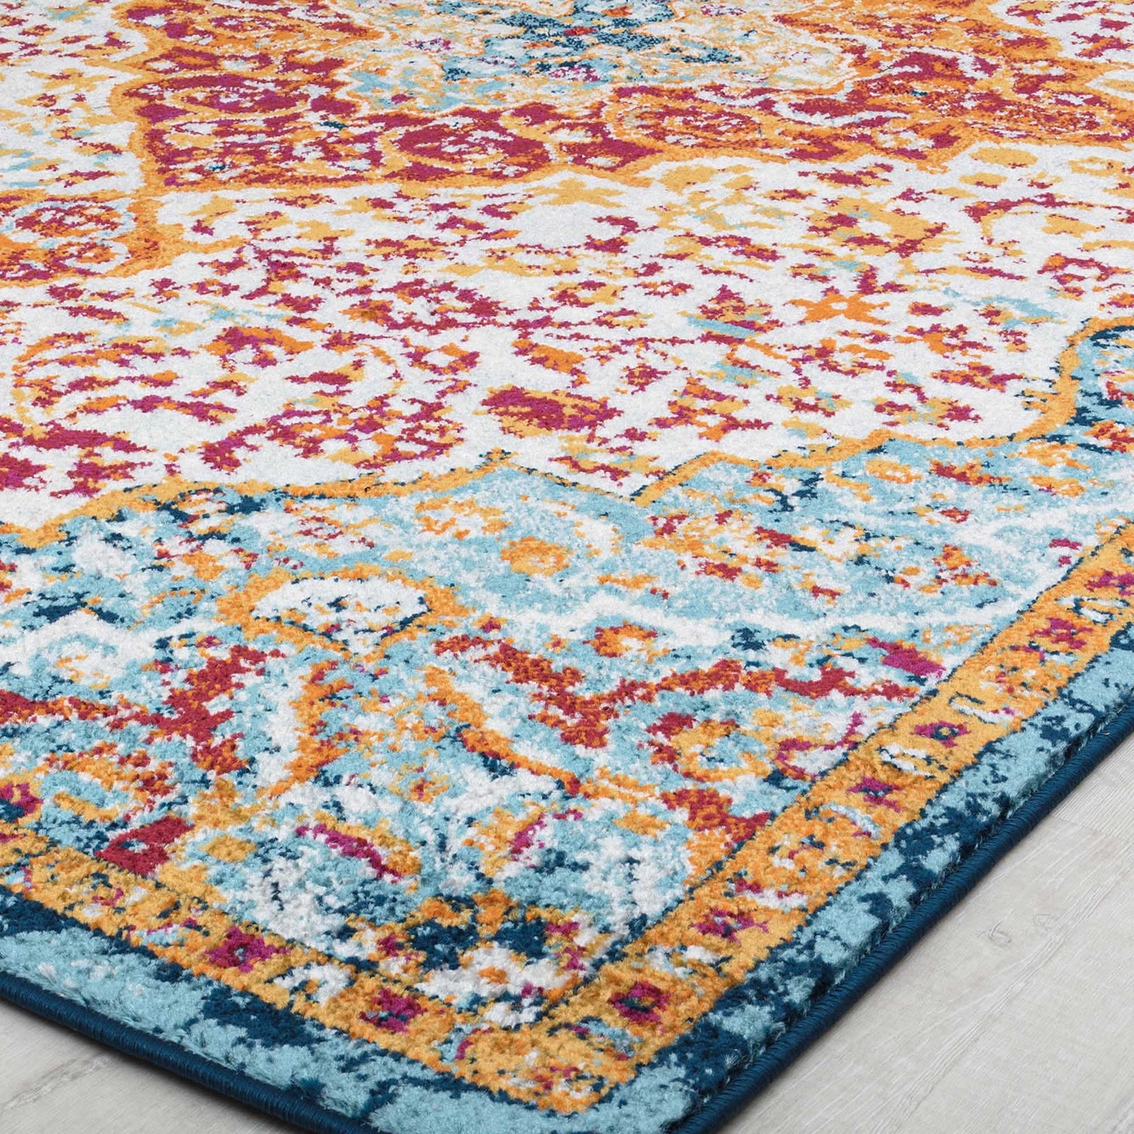 Rugs America Harper Sweet Nectar Abstract Vintage Area Rug - Image 7 of 8